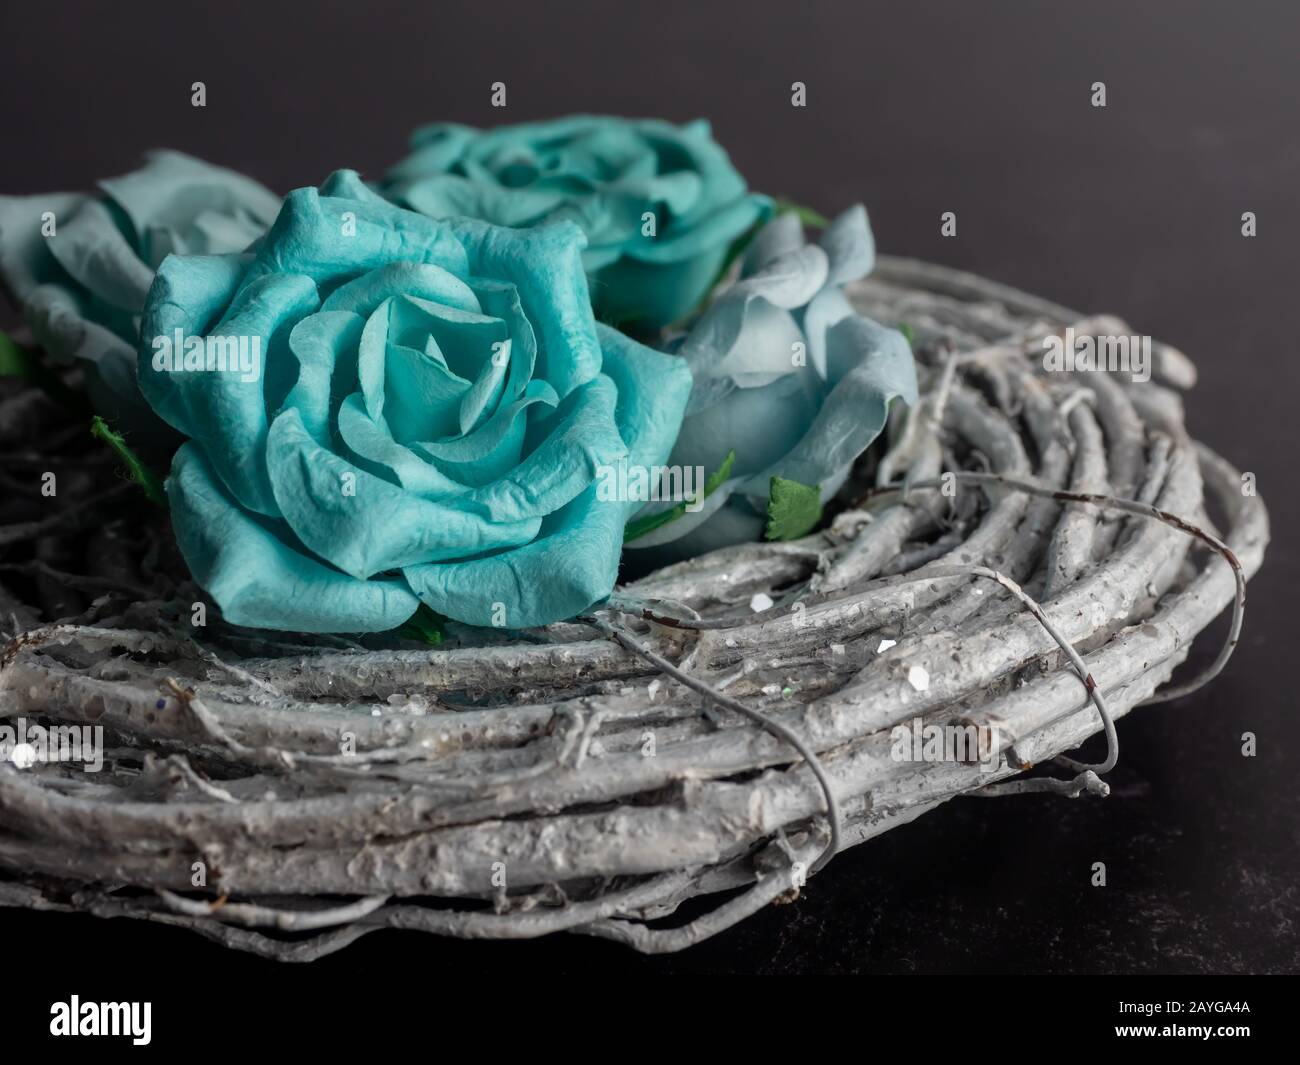 Teal and blue paper rose flower blooms on gray wood coiled up against a slate  black background. Pretty home decor Stock Photo - Alamy